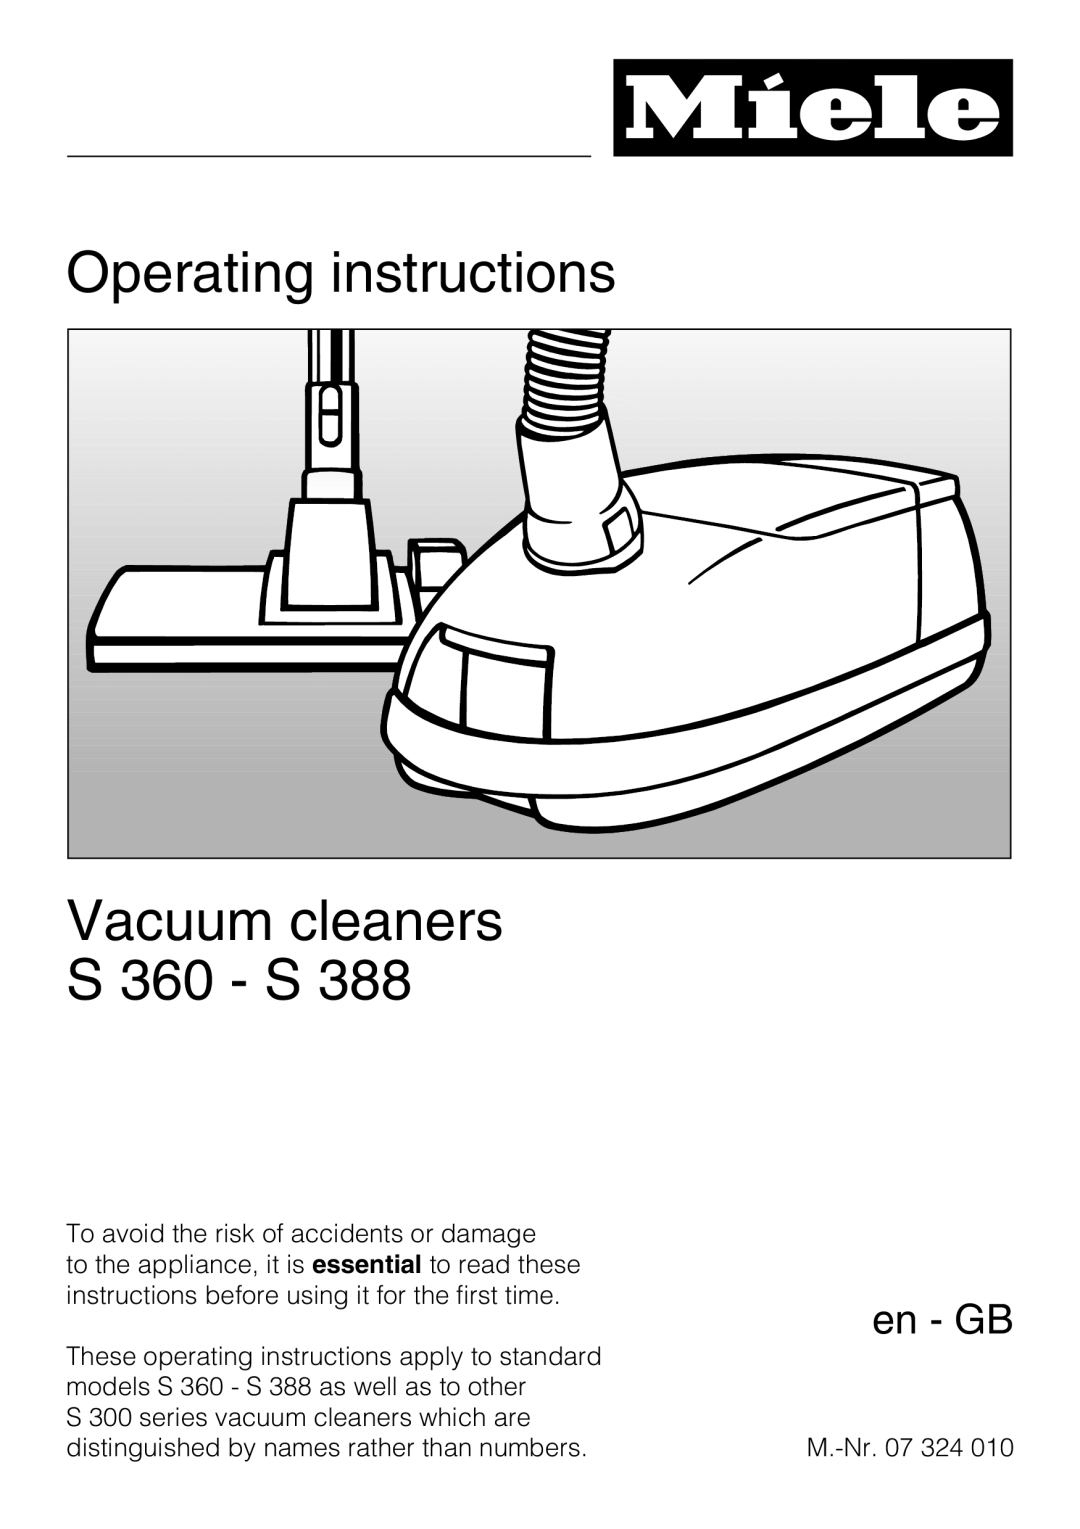 Miele S 388 manual Operating instructions, Vacuum cleaners, S 360 - S, en - GB 